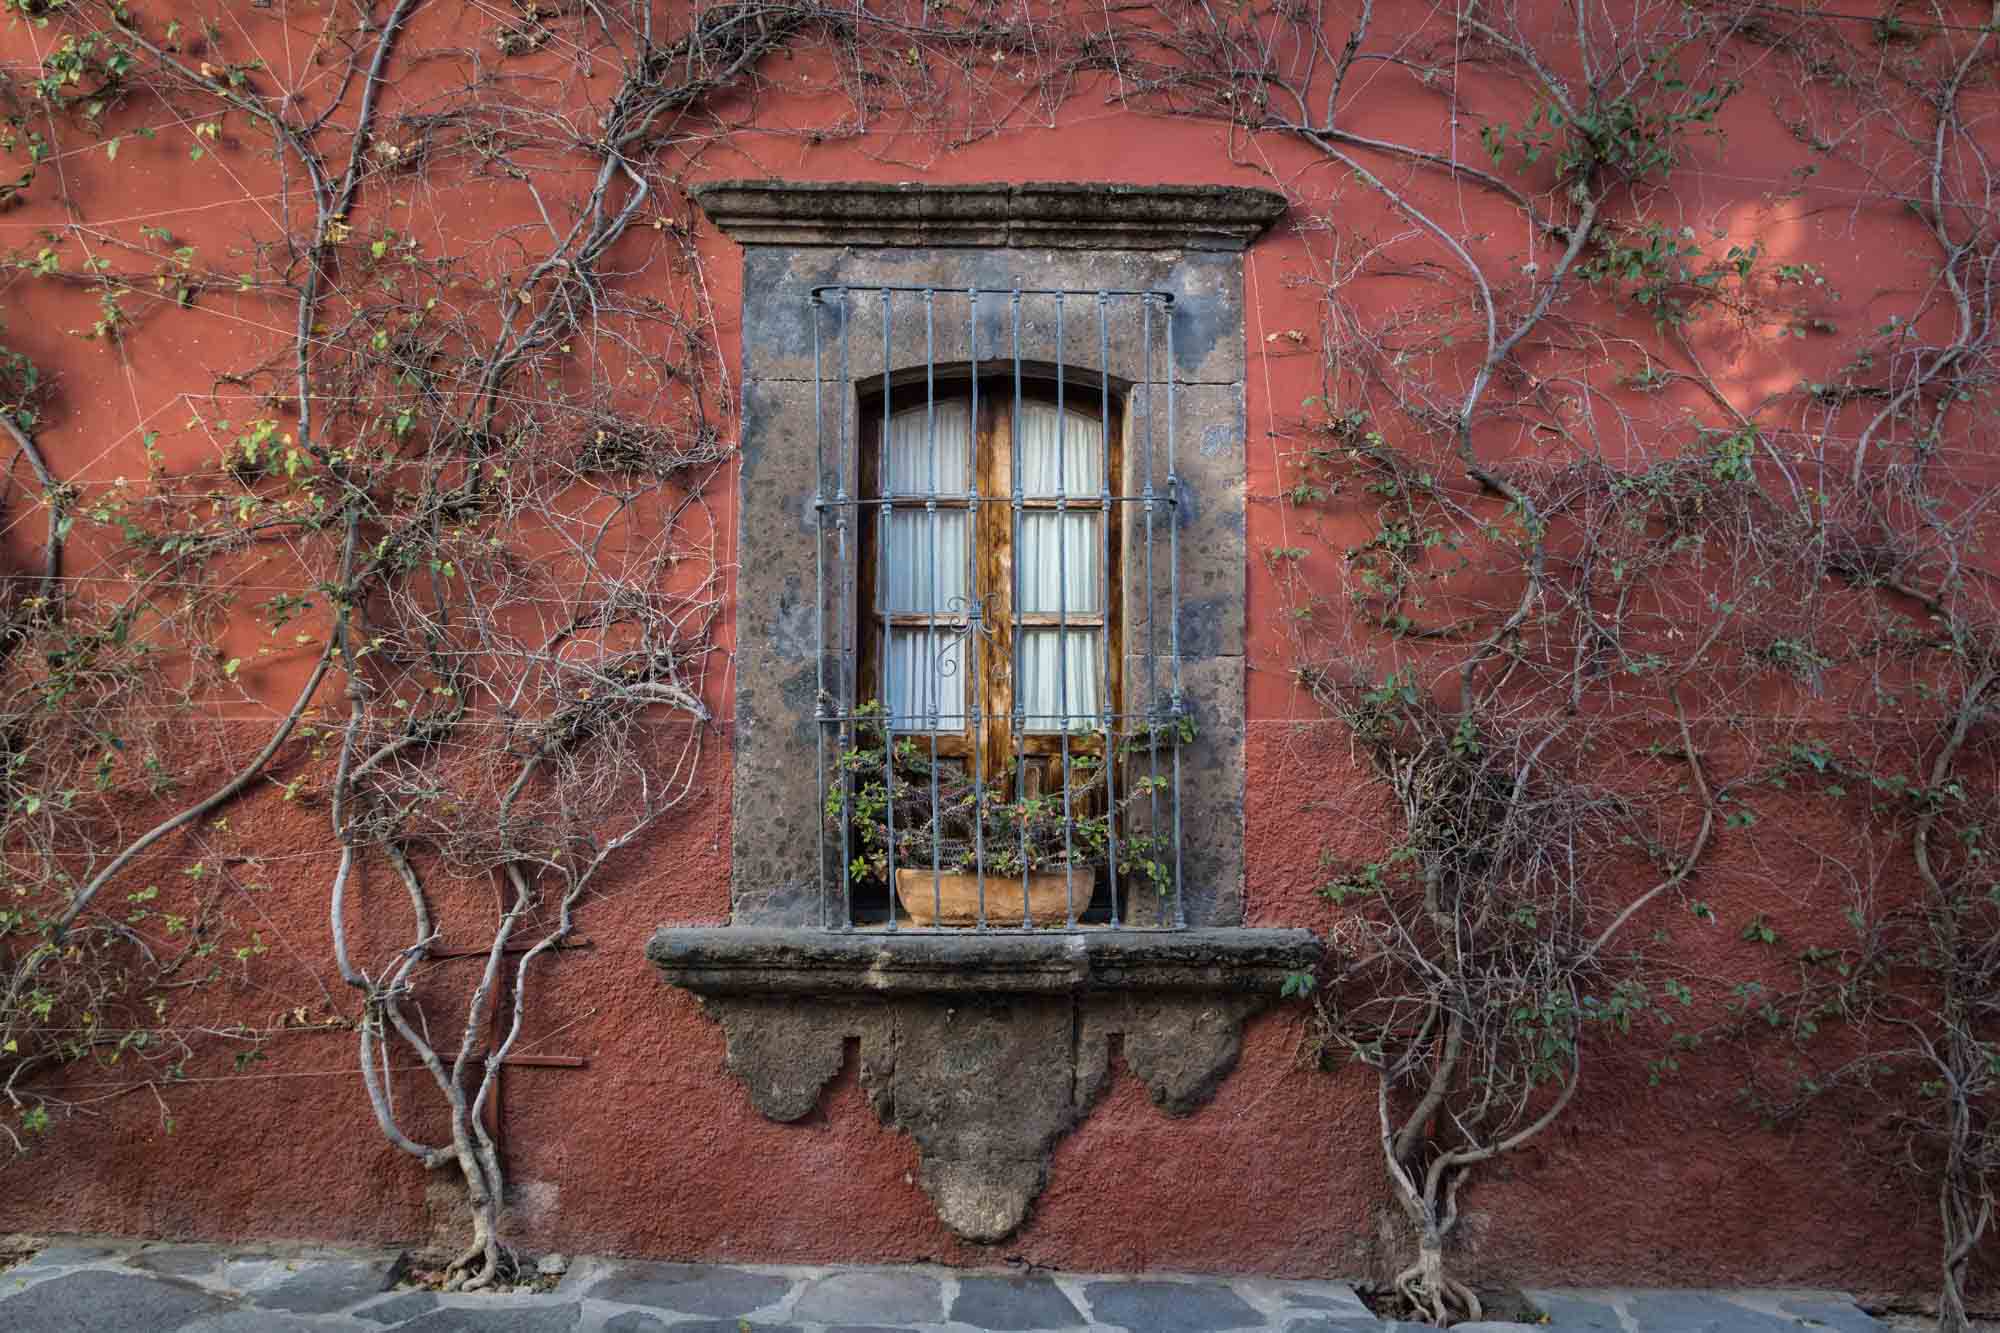 A lovely window covered by vines in San Miguel de Allende